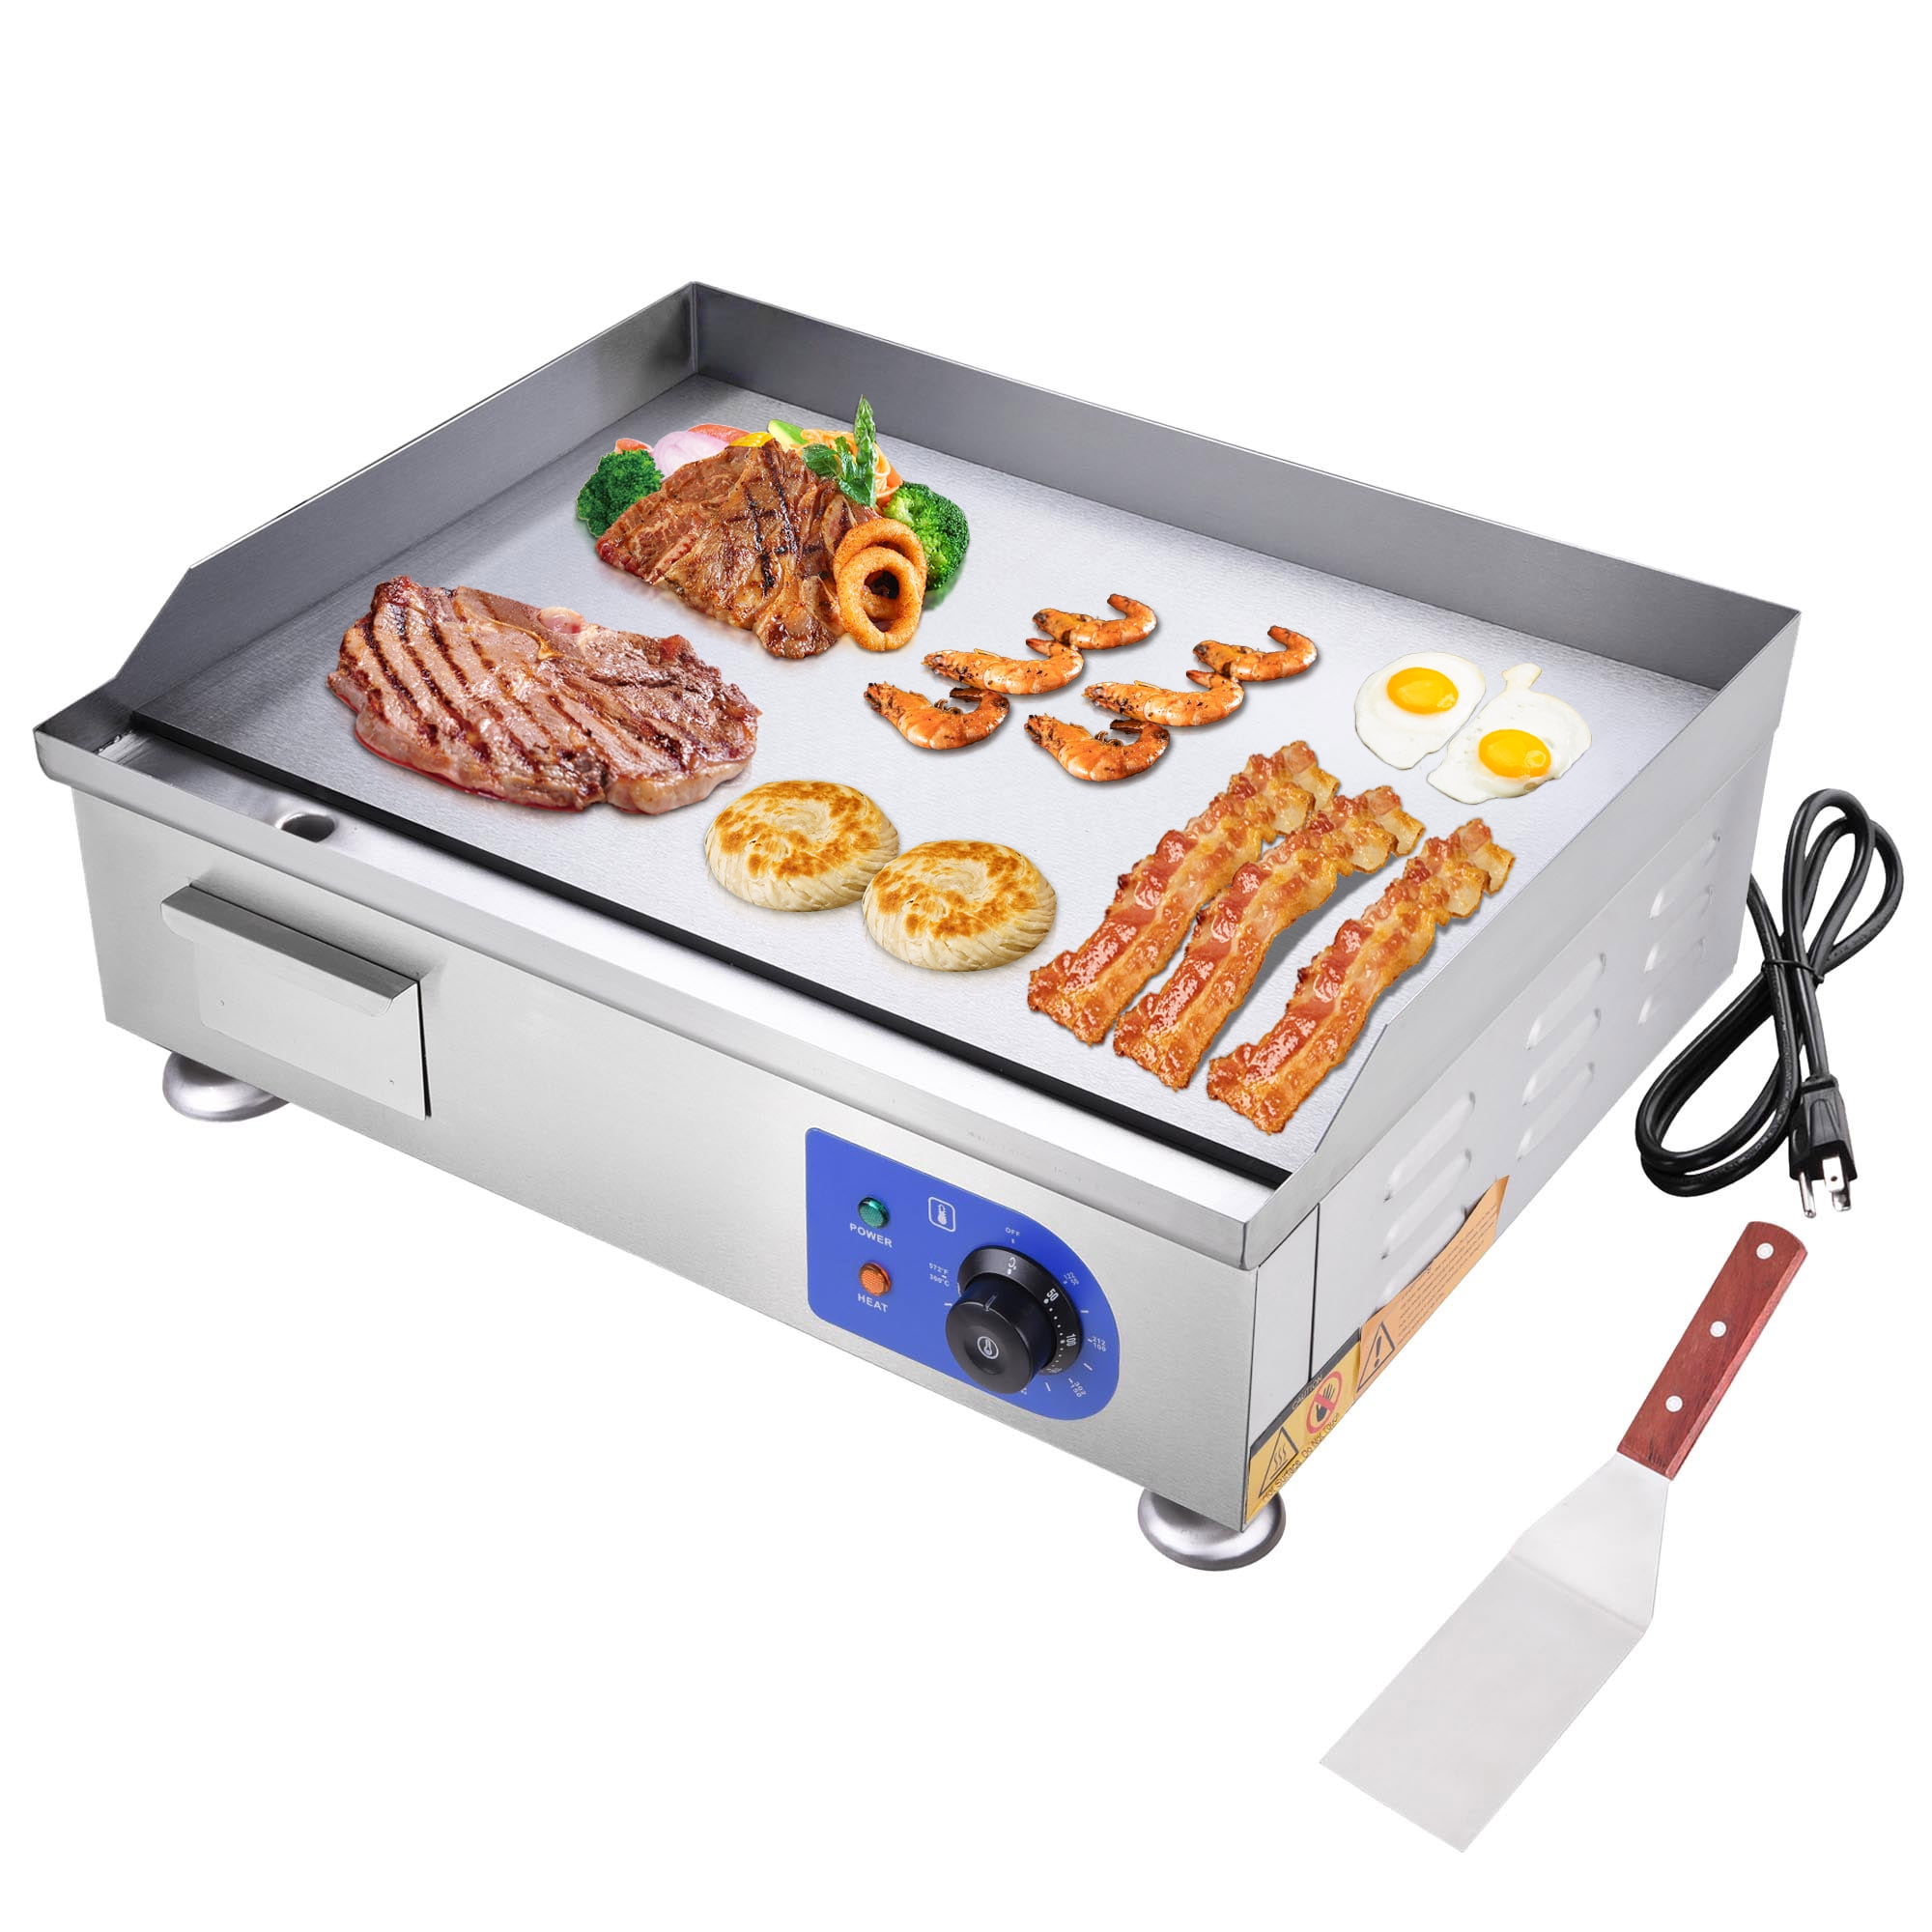 Stainless Steel 73cm Commercial Electric Griddle Hotplate Flat BBQ Grill UK Plug 